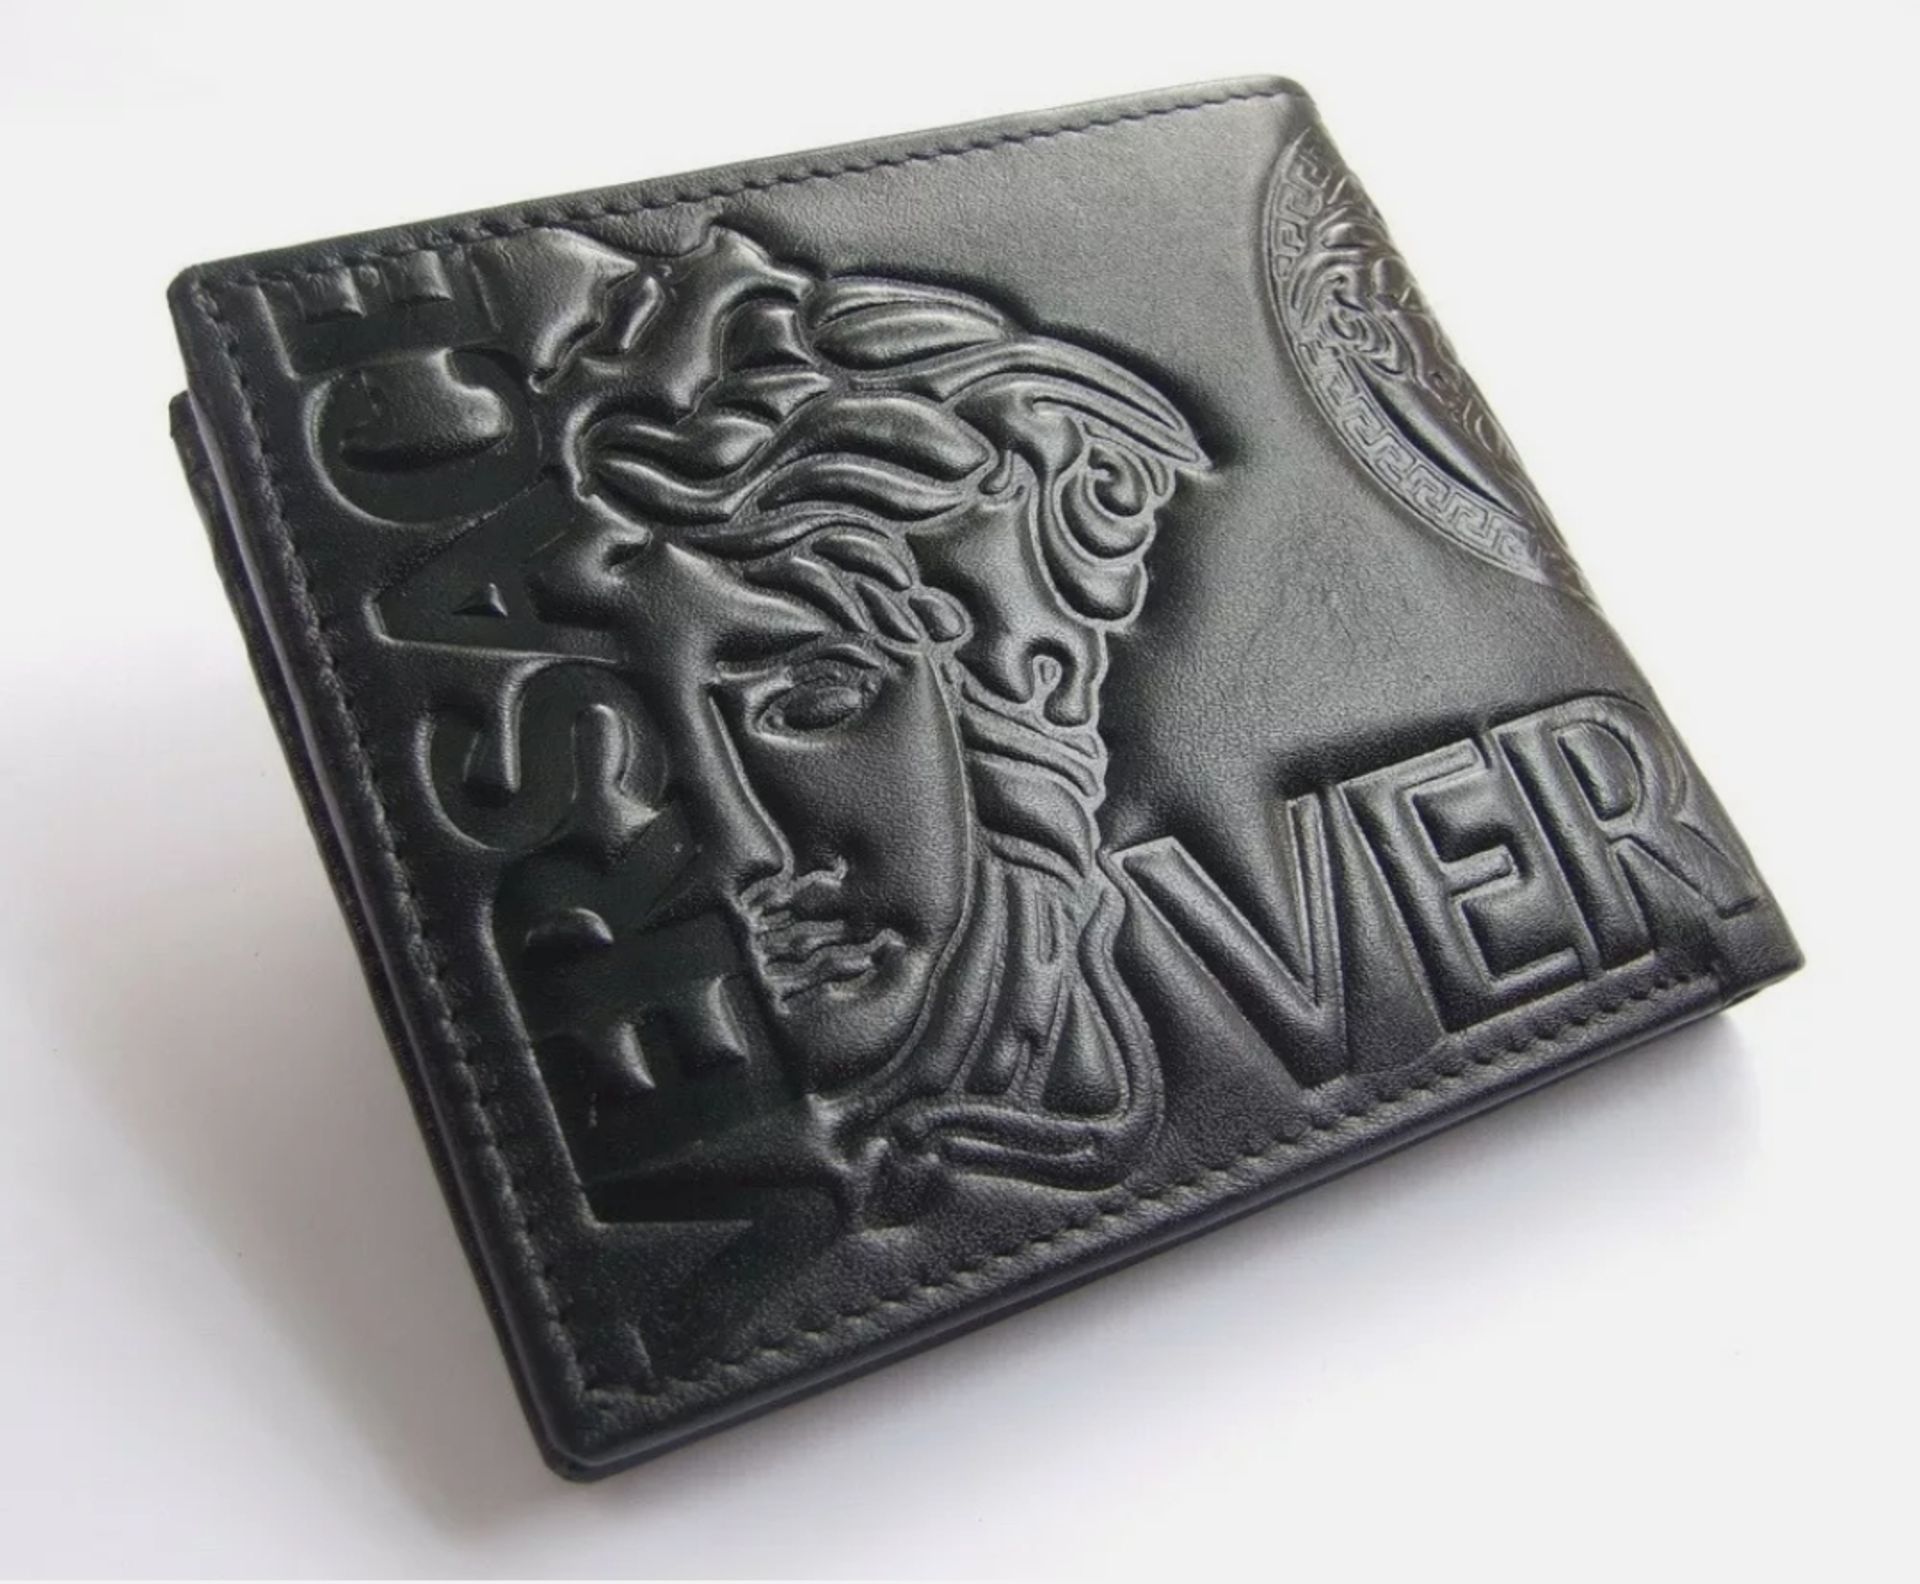 Versace Men's Leather Wallet - New With Box - Image 2 of 9